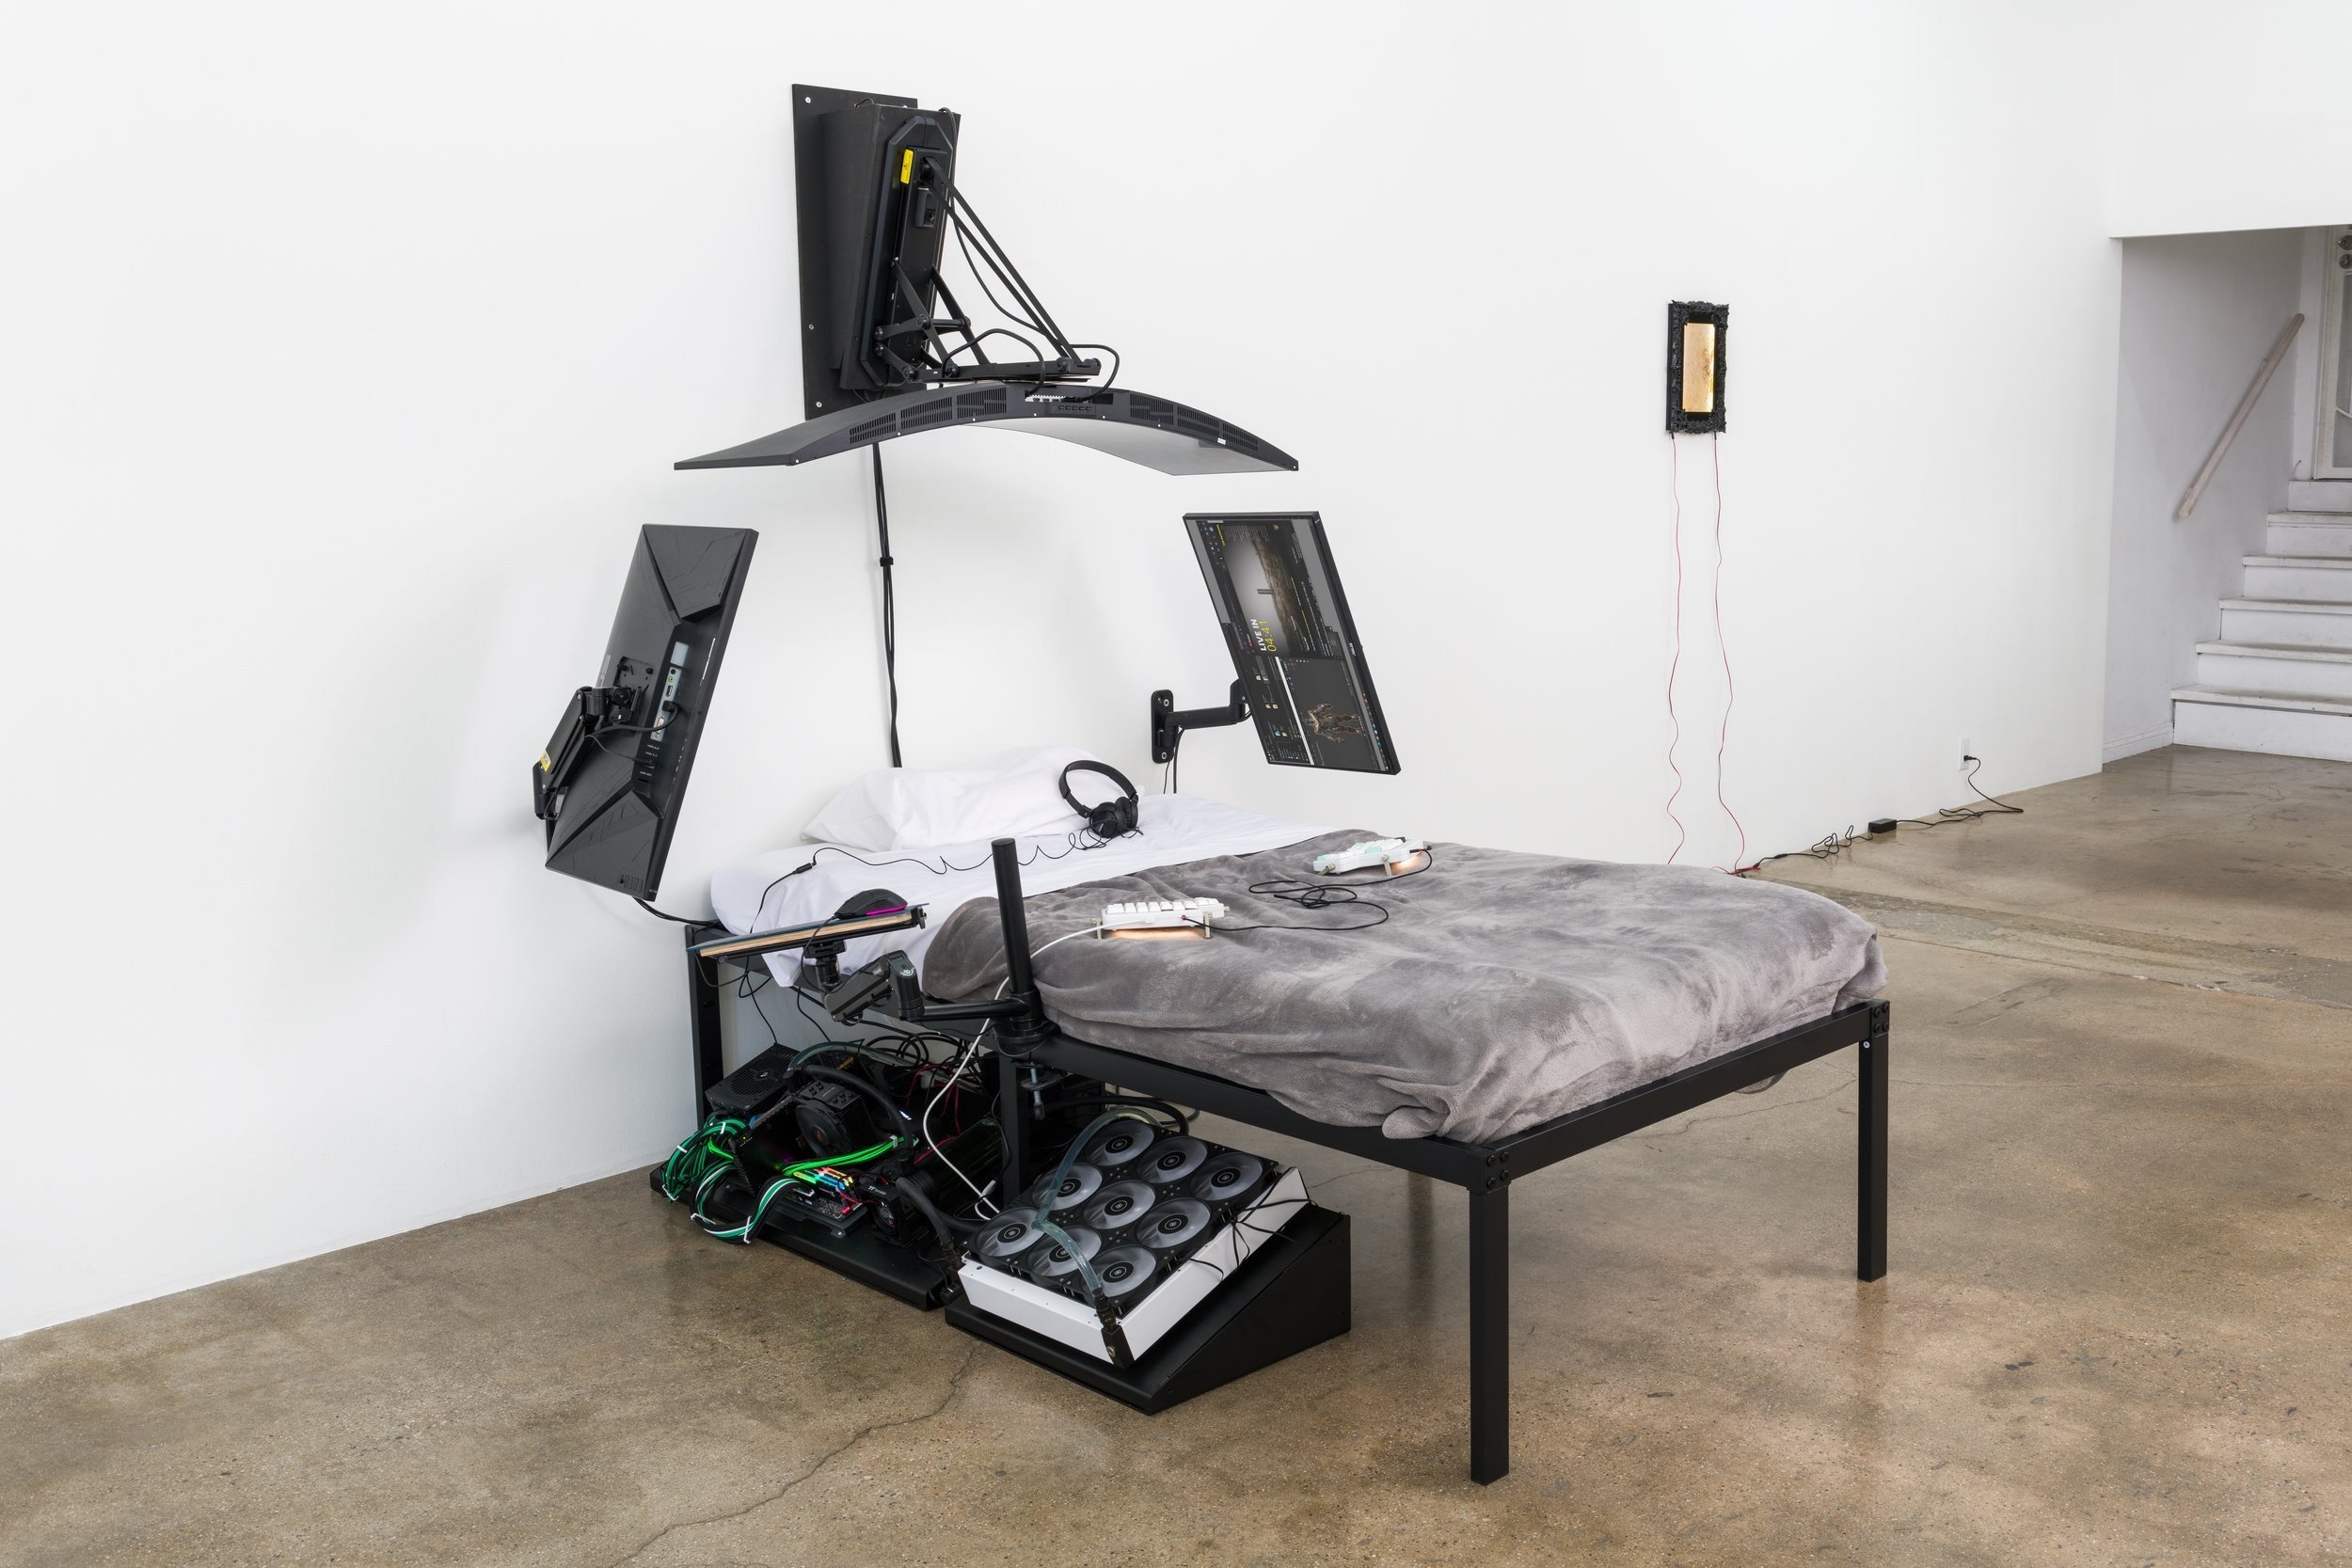  Filip Kostic,  Bed PC  (Twin), Custom built water cooled computer built into the frame of the bed. Variable screens to create a shield like shape, blanket, and pillows. Variable peripherals including keyboard, mouse, streaming microphone, and camera